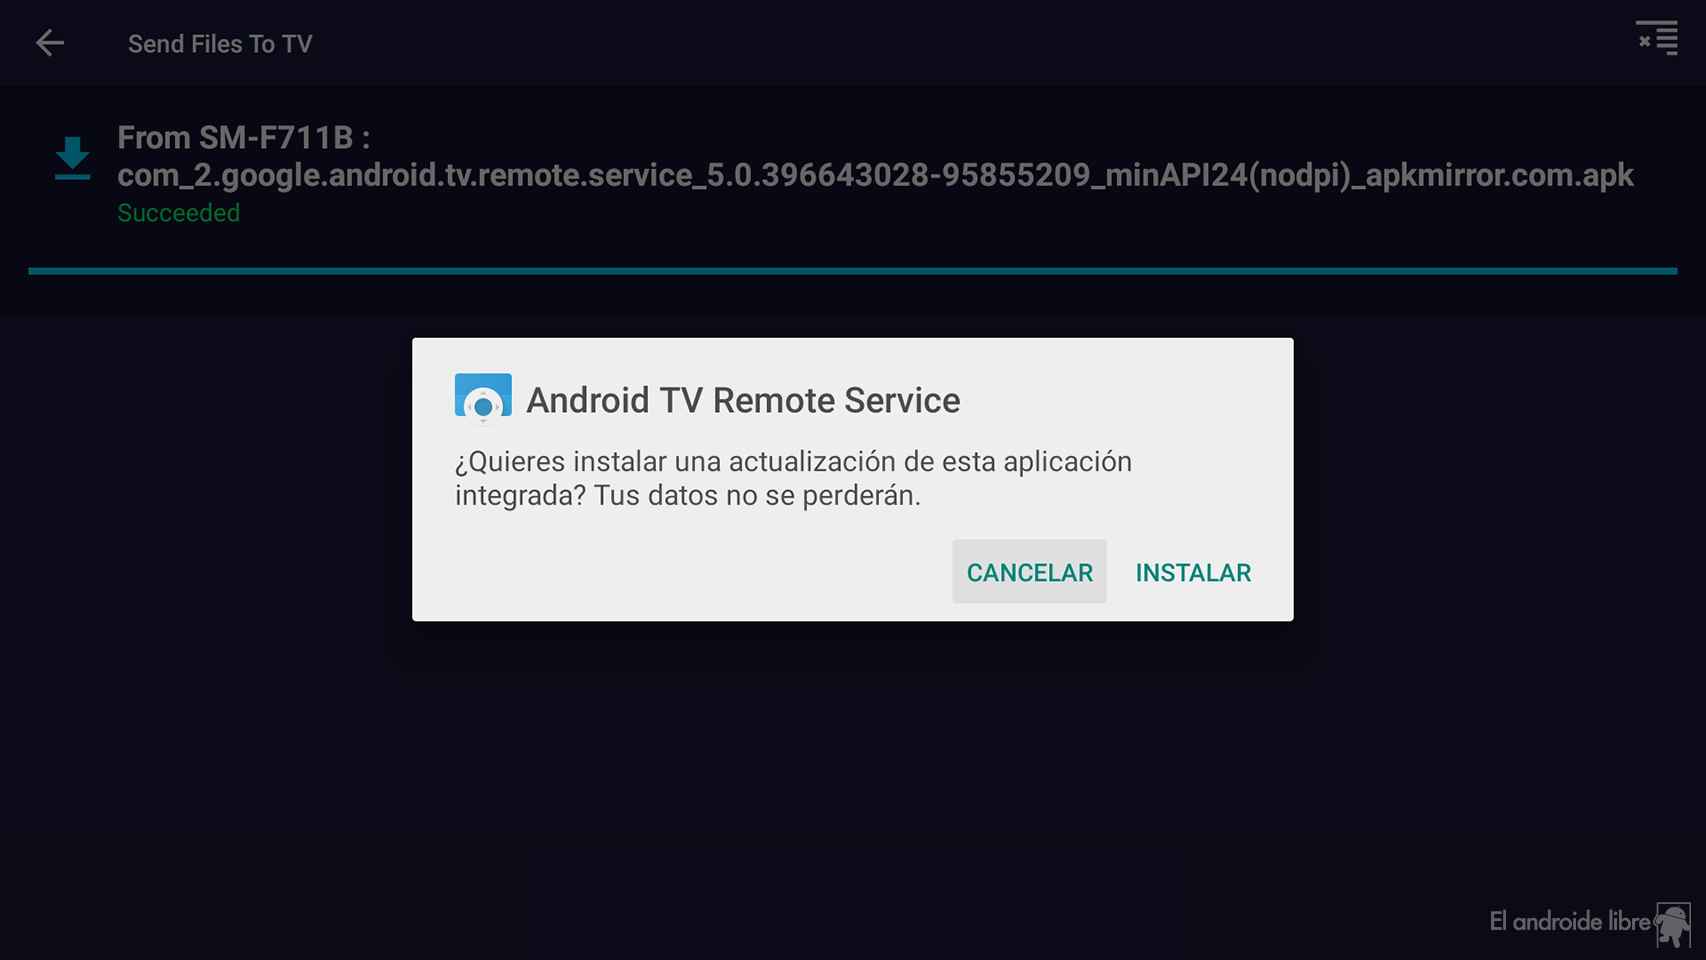 Android TV Remote Service